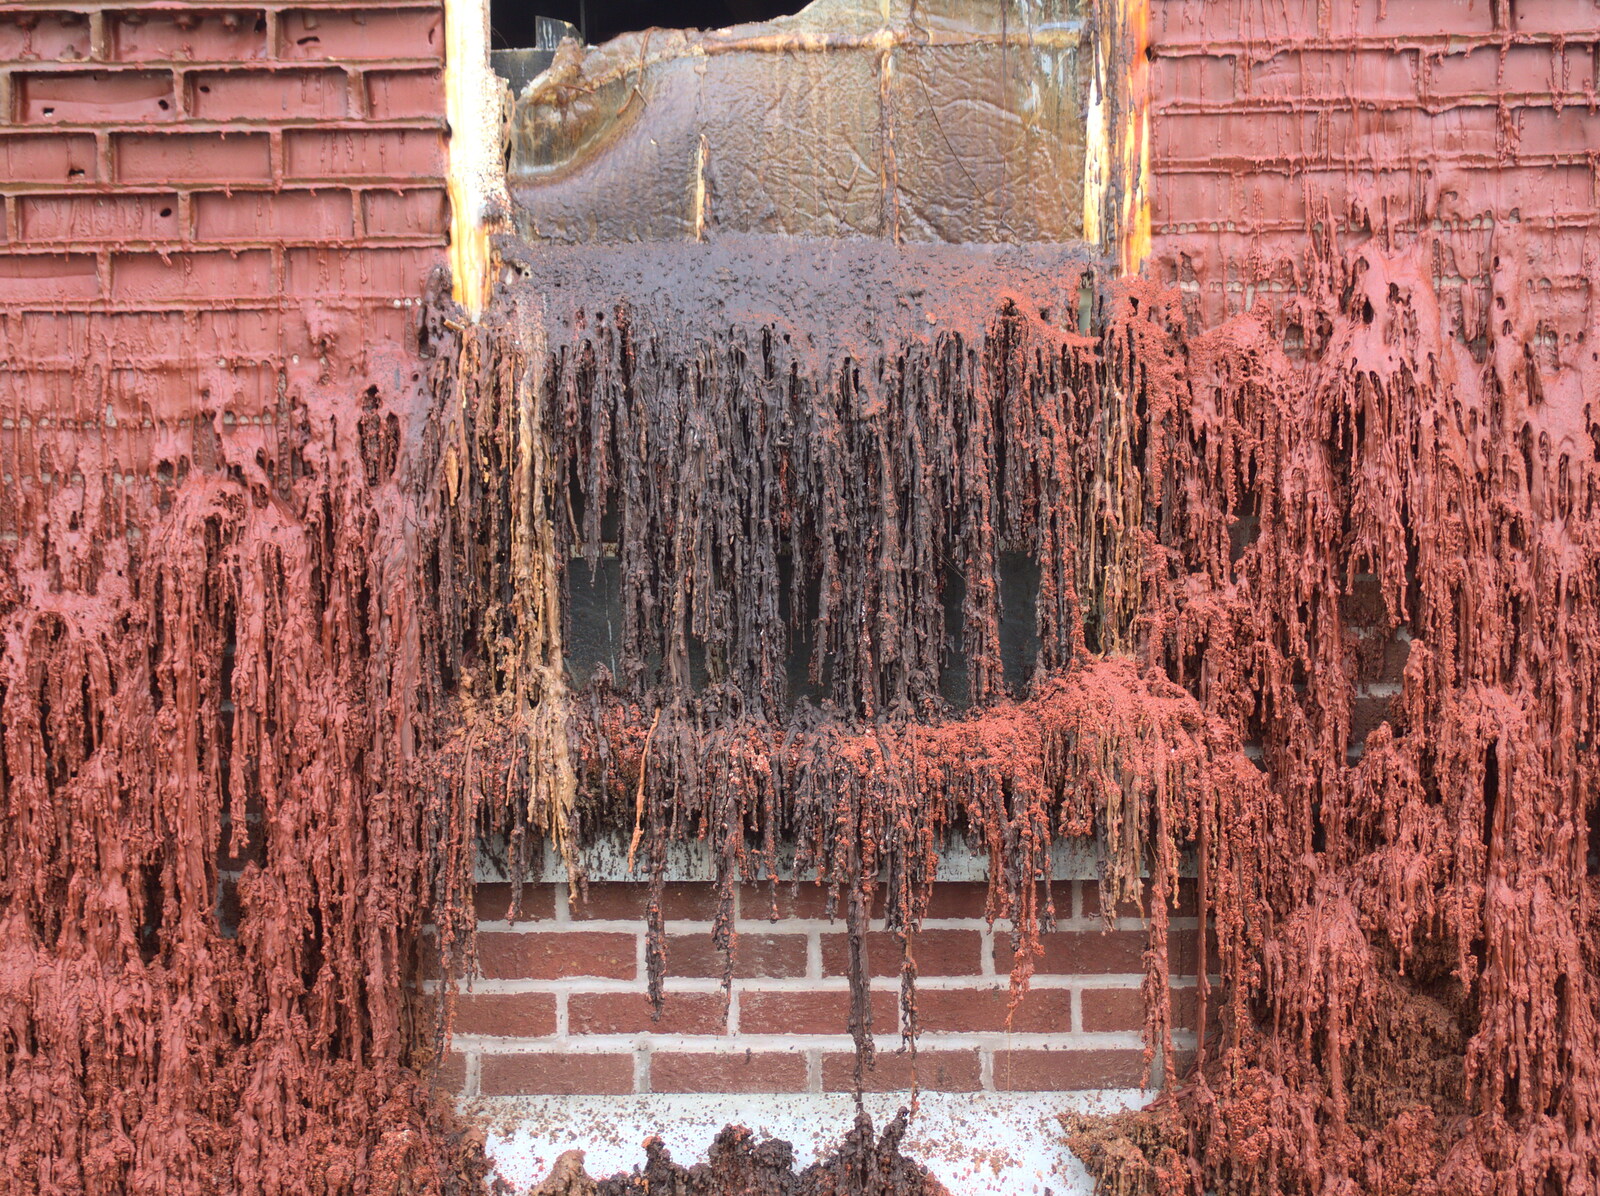 More drips of wax, like a brown frozen waterfall from A Melting House Made of Wax, Southwark, London - 12th November 2014